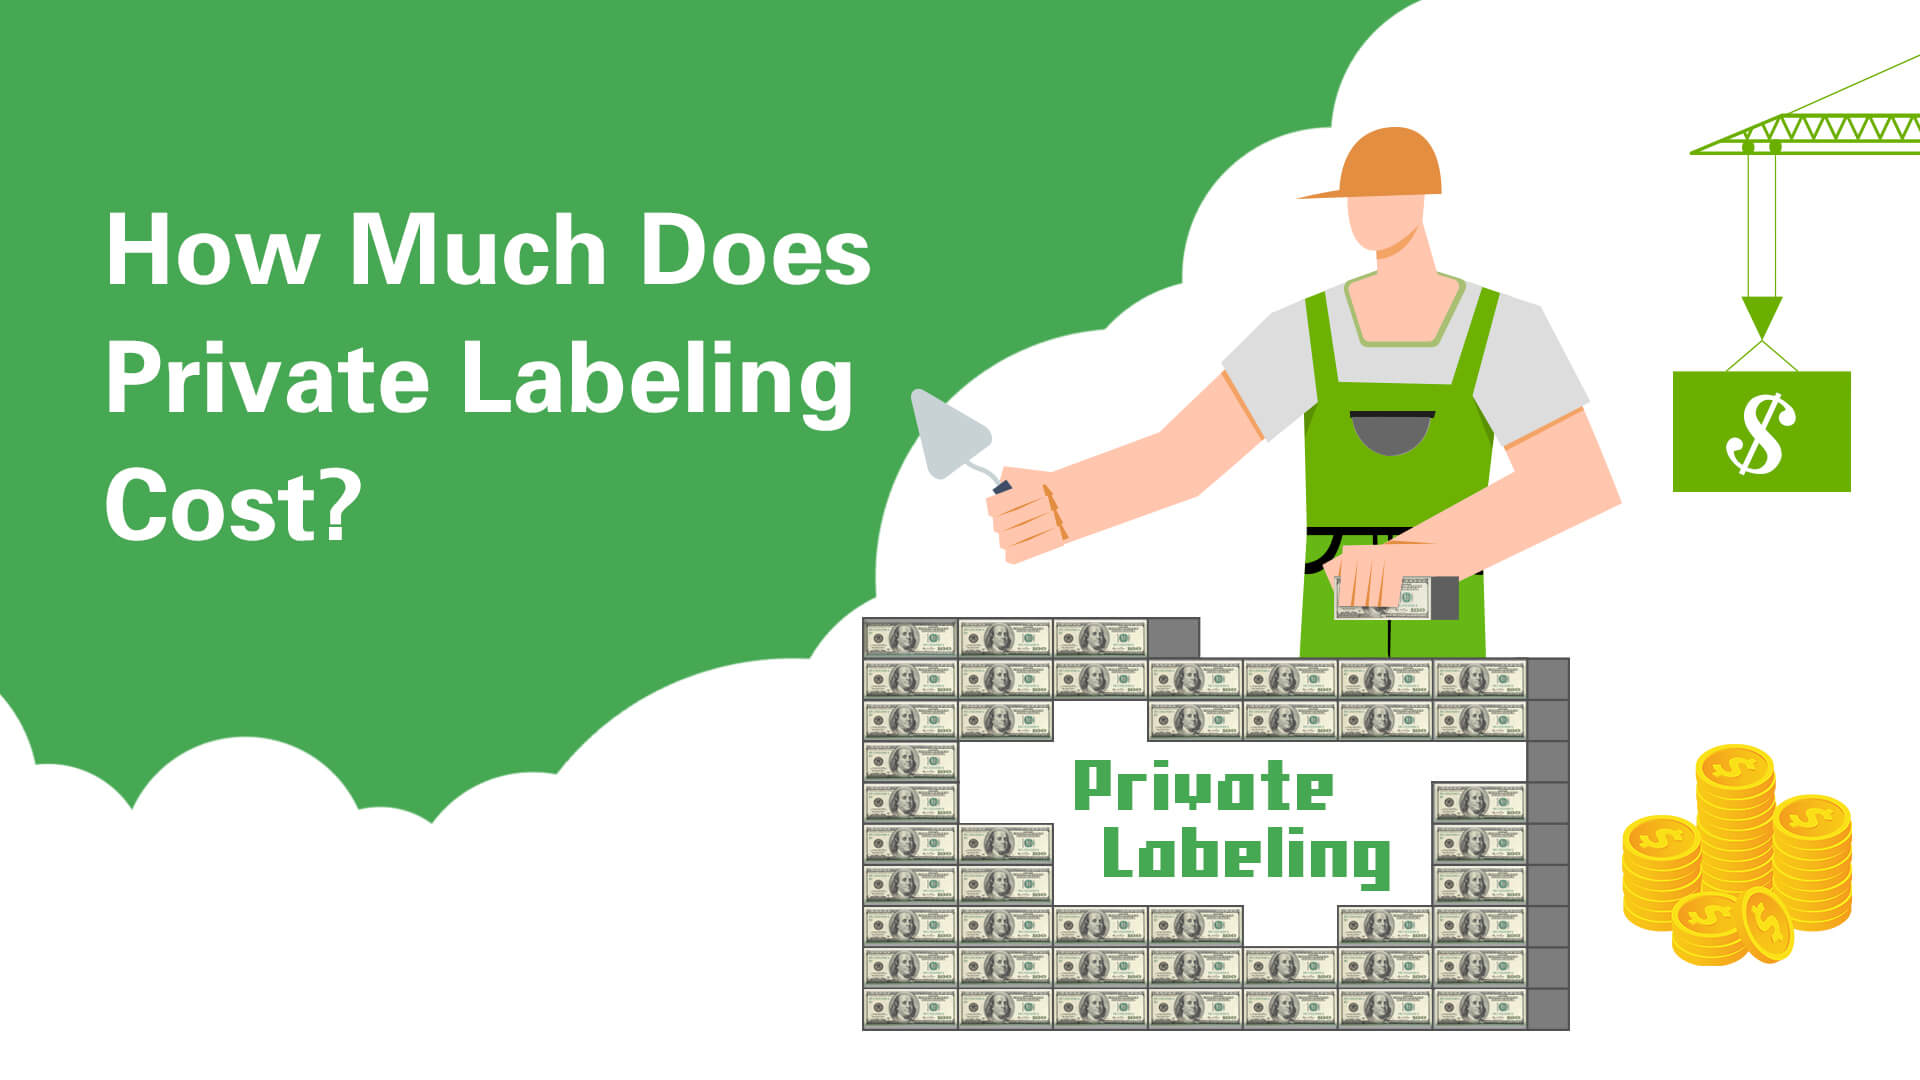 How long does it take to realistically private label a product? - Quora